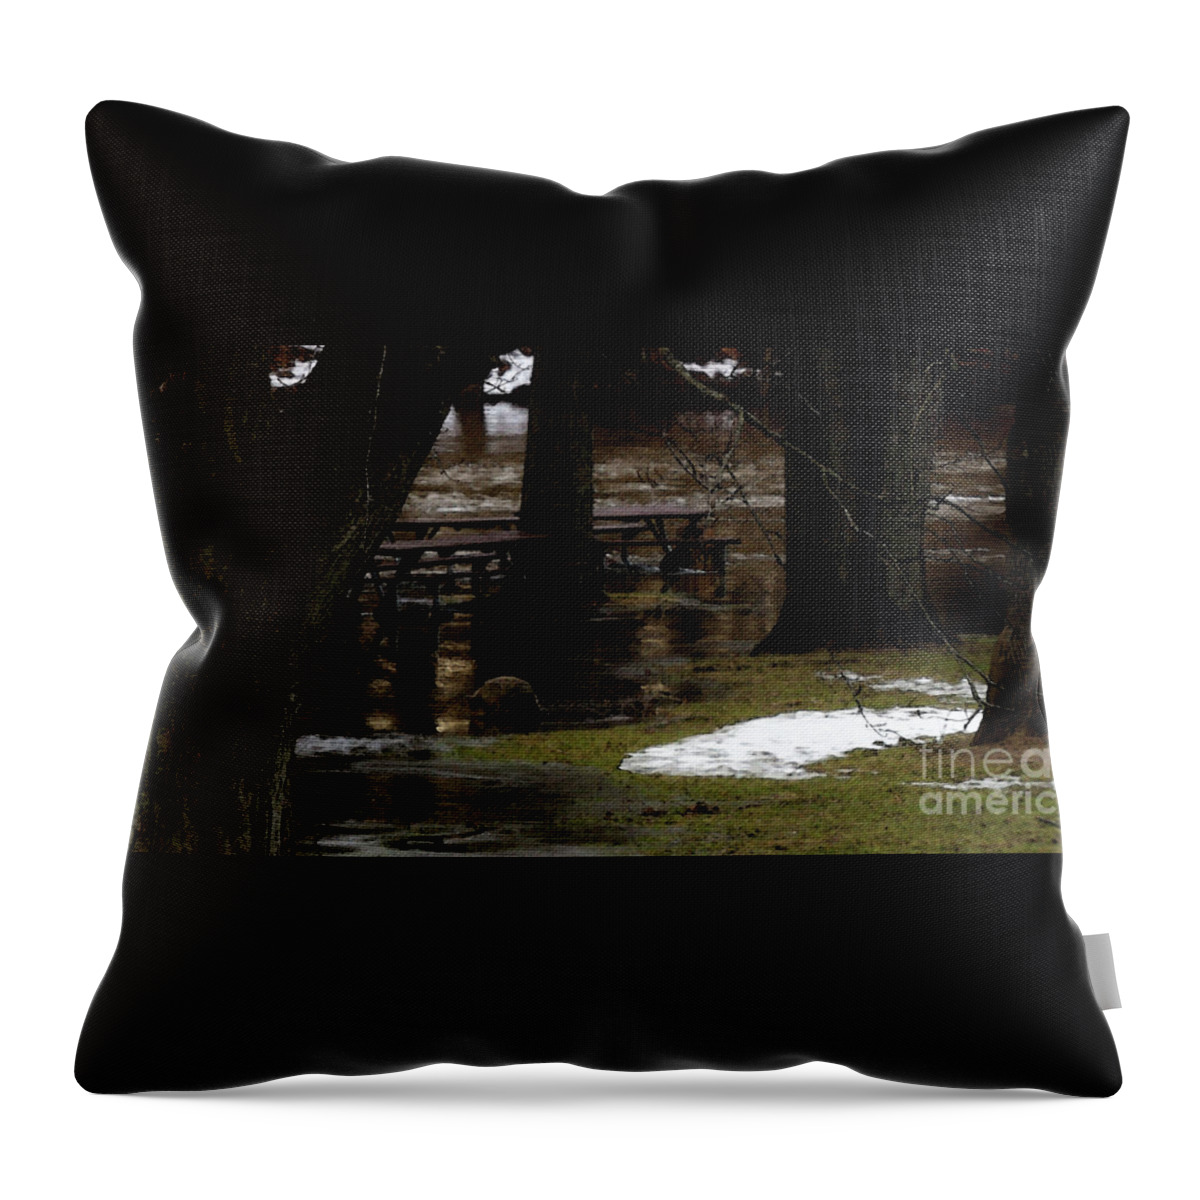 Woods Throw Pillow featuring the photograph Dear Silence by Linda Shafer